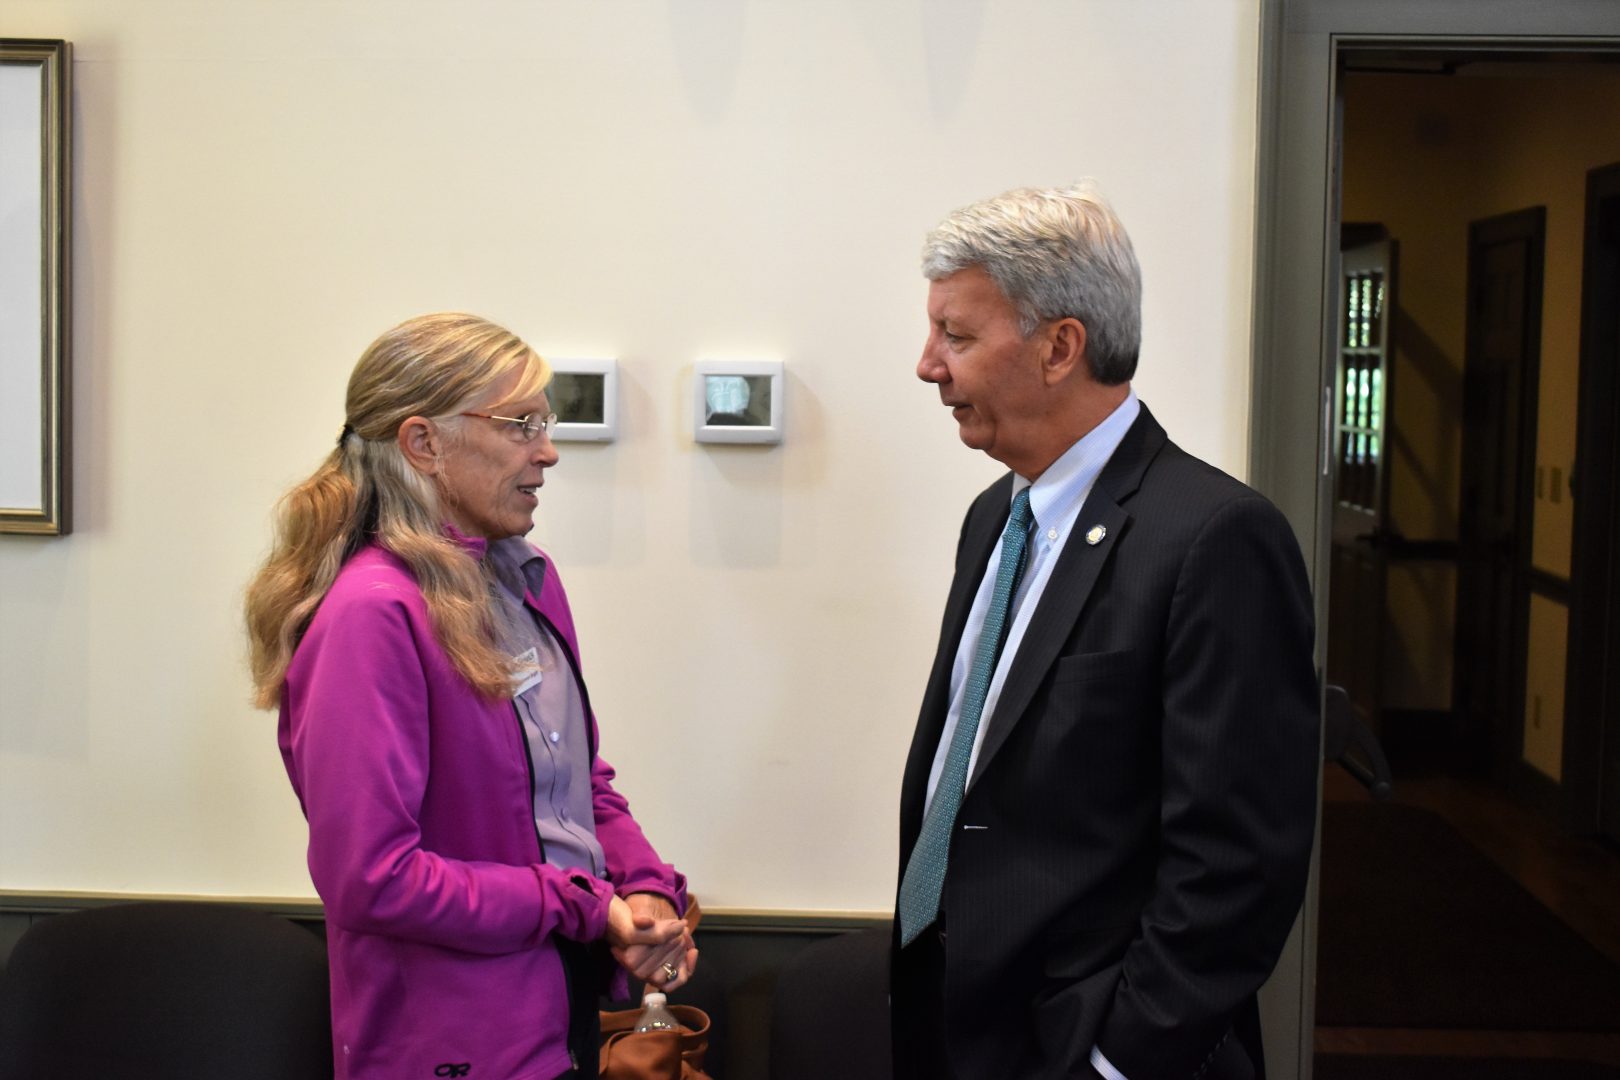 Starr Cummin Bright, a gunshot survivor, speaks with state Sen. Tom Killion, R-Delaware/Chester, ahead of a panel discussion on Oct. 1, 2019, at the Chadds Ford Township Municipal Building.